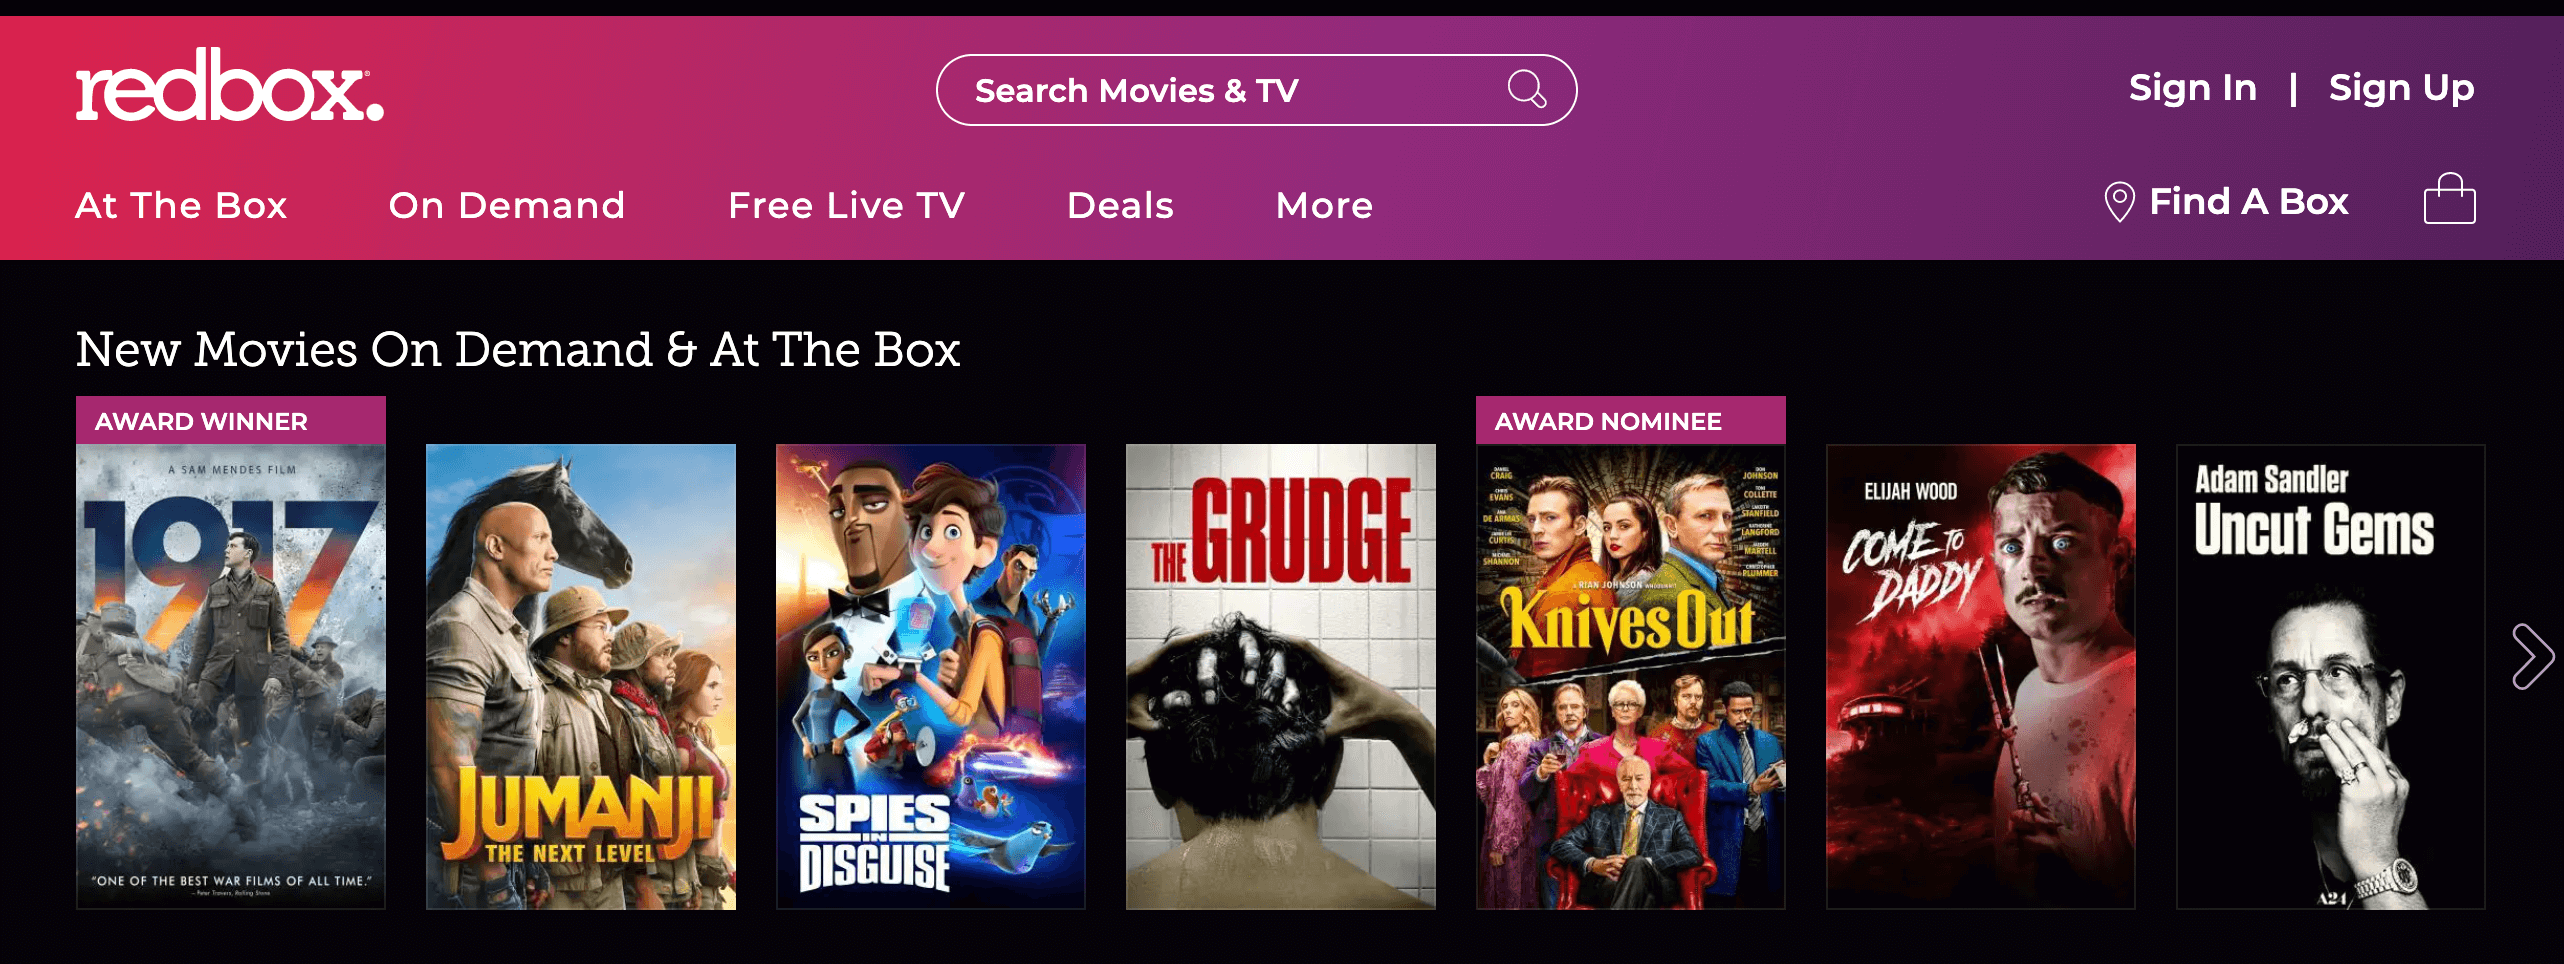 Pay Less For TV: The 5 Best Cable Alternatives - Redbox On Demand